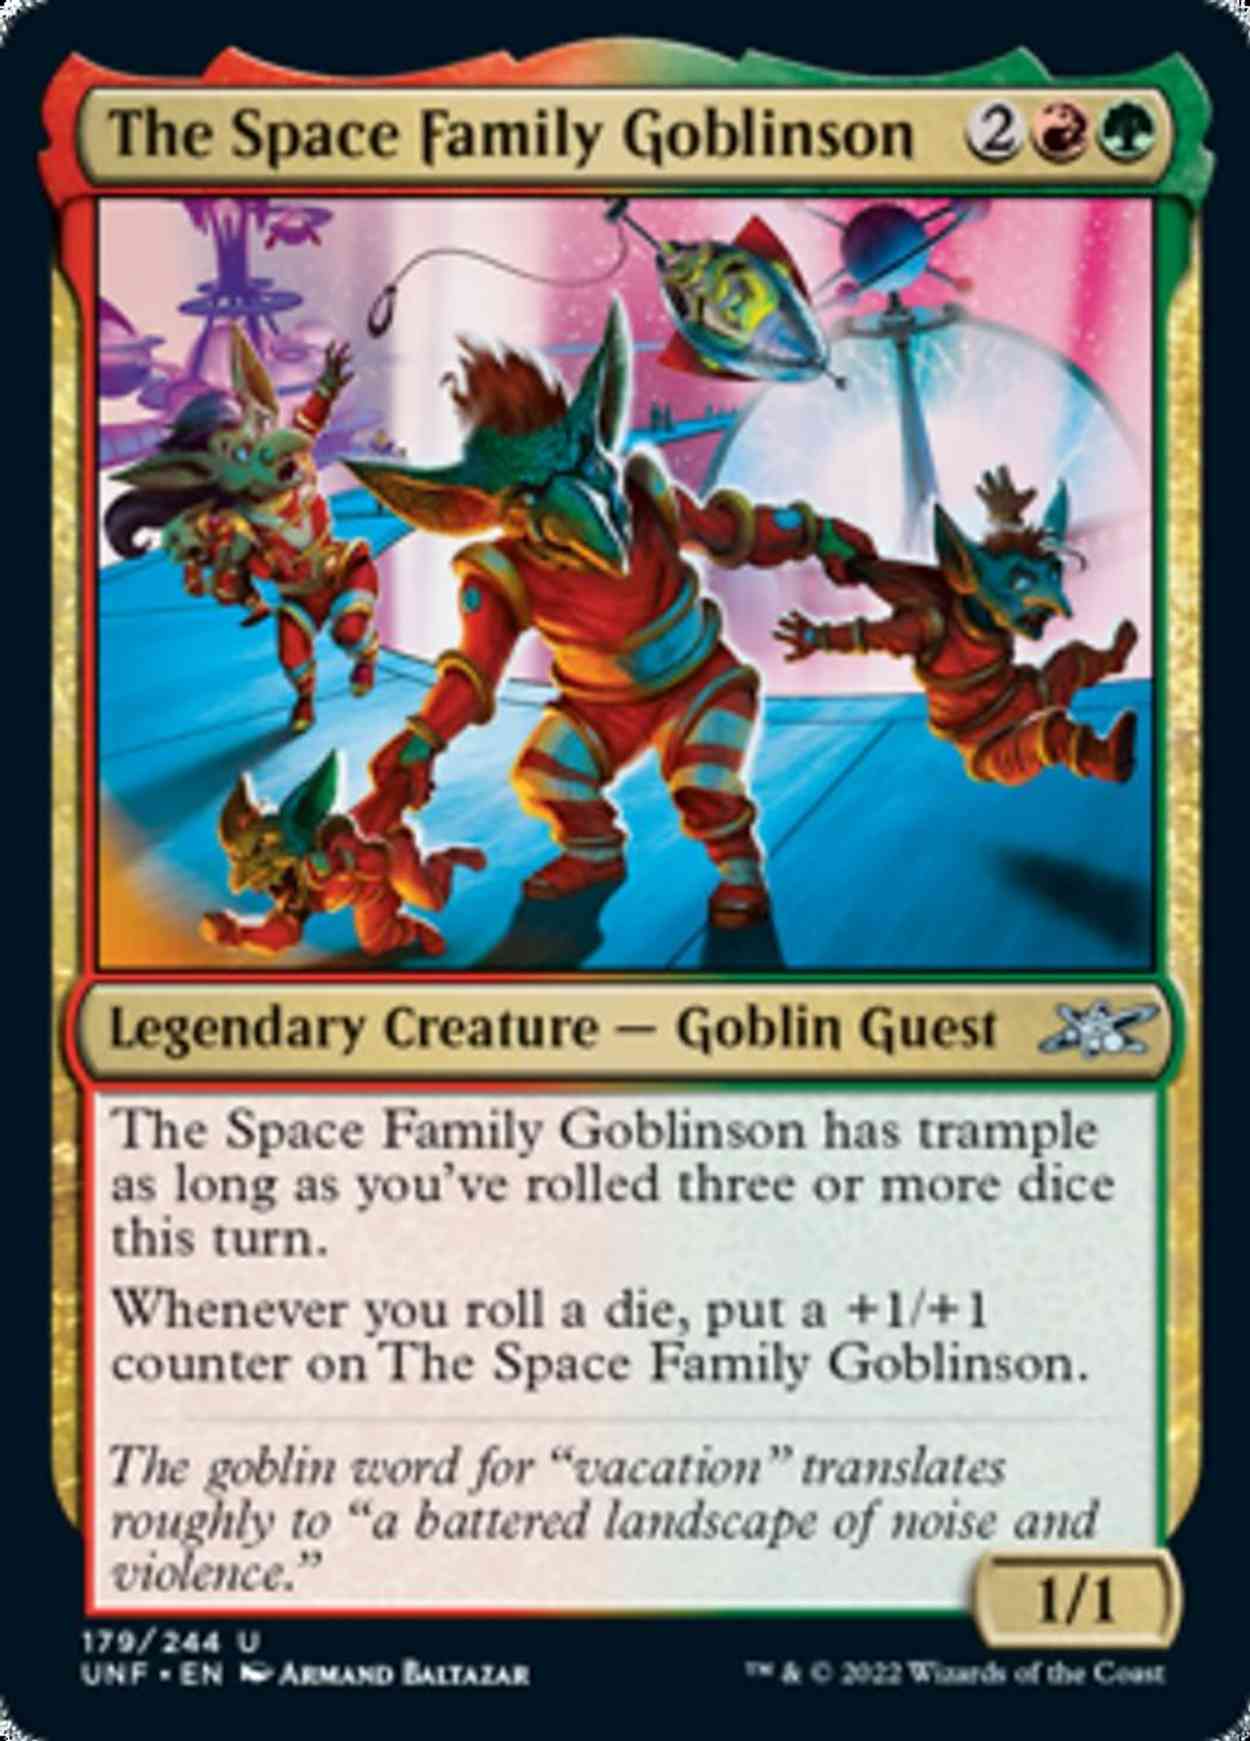 The Space Family Goblinson magic card front